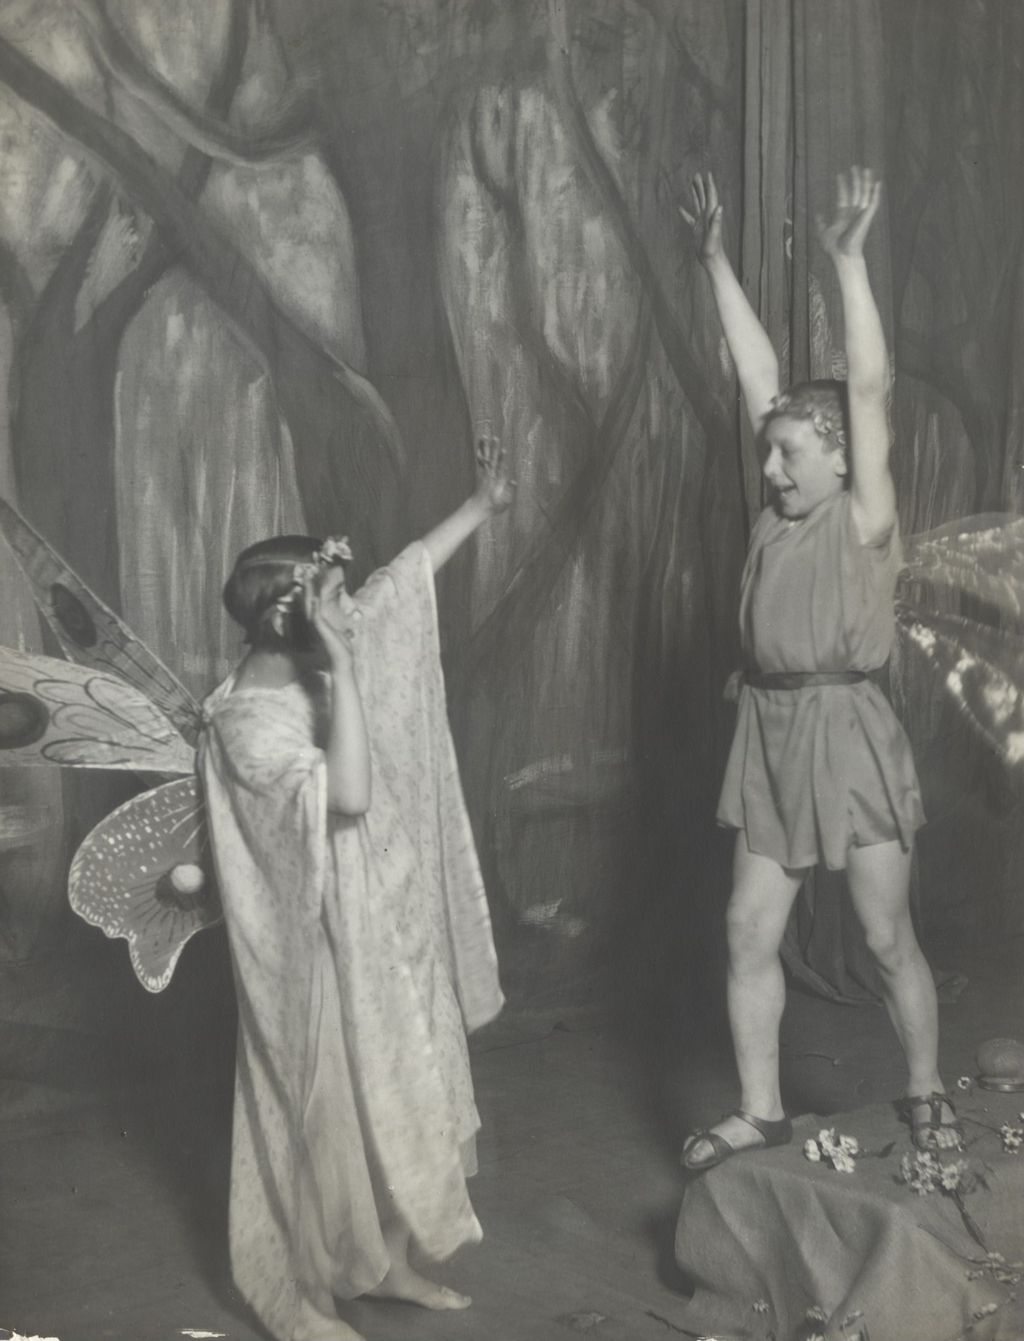 Two young performers in "A Midsummer Night's Dream" production at Hull-House